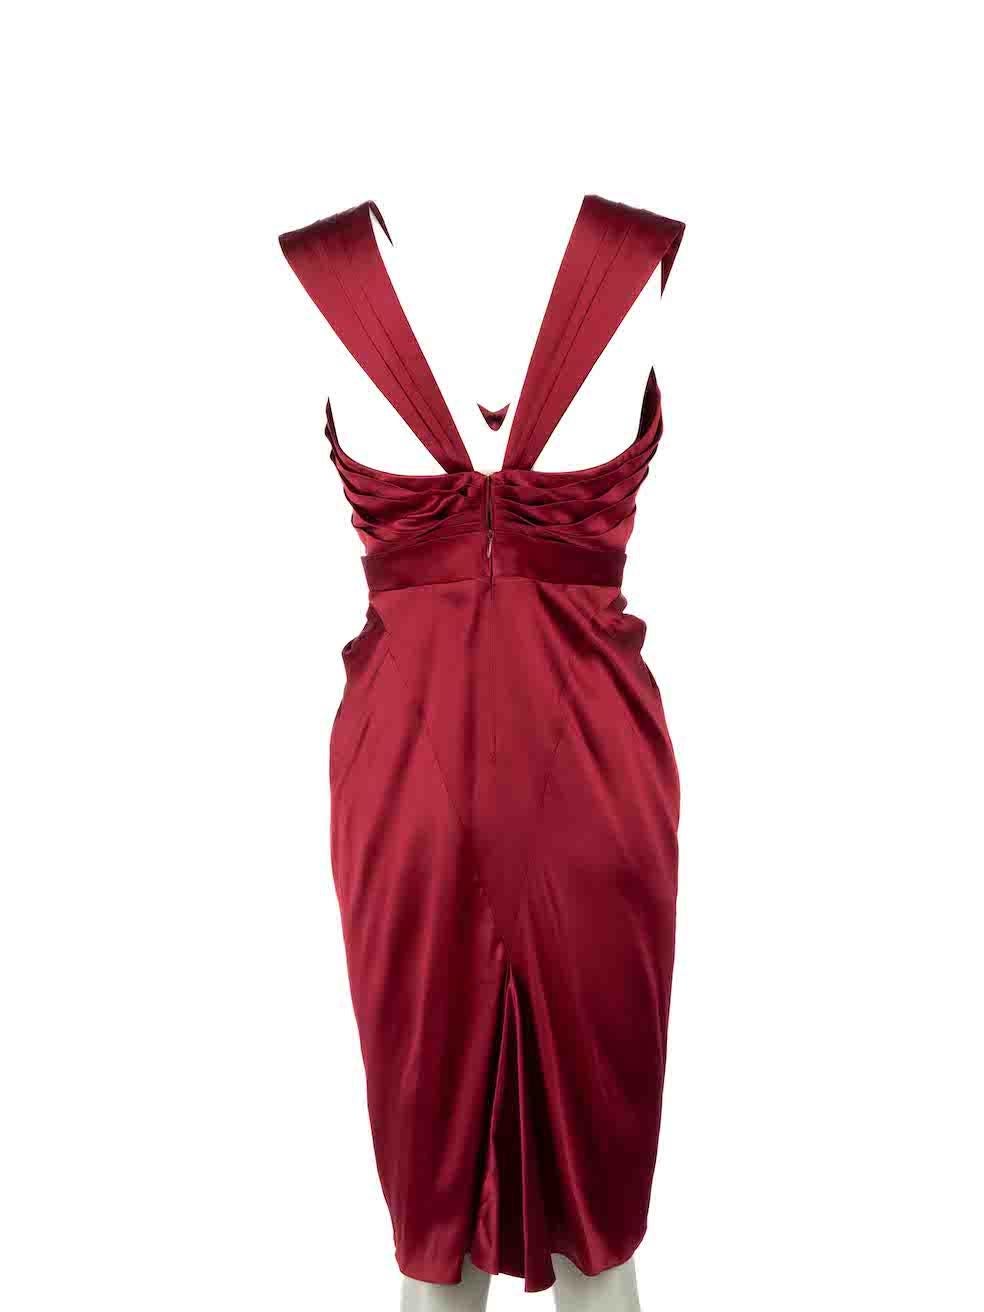 Zac Posen Burgundy Pleat Detail Sleeveless Dress Size M In Excellent Condition For Sale In London, GB